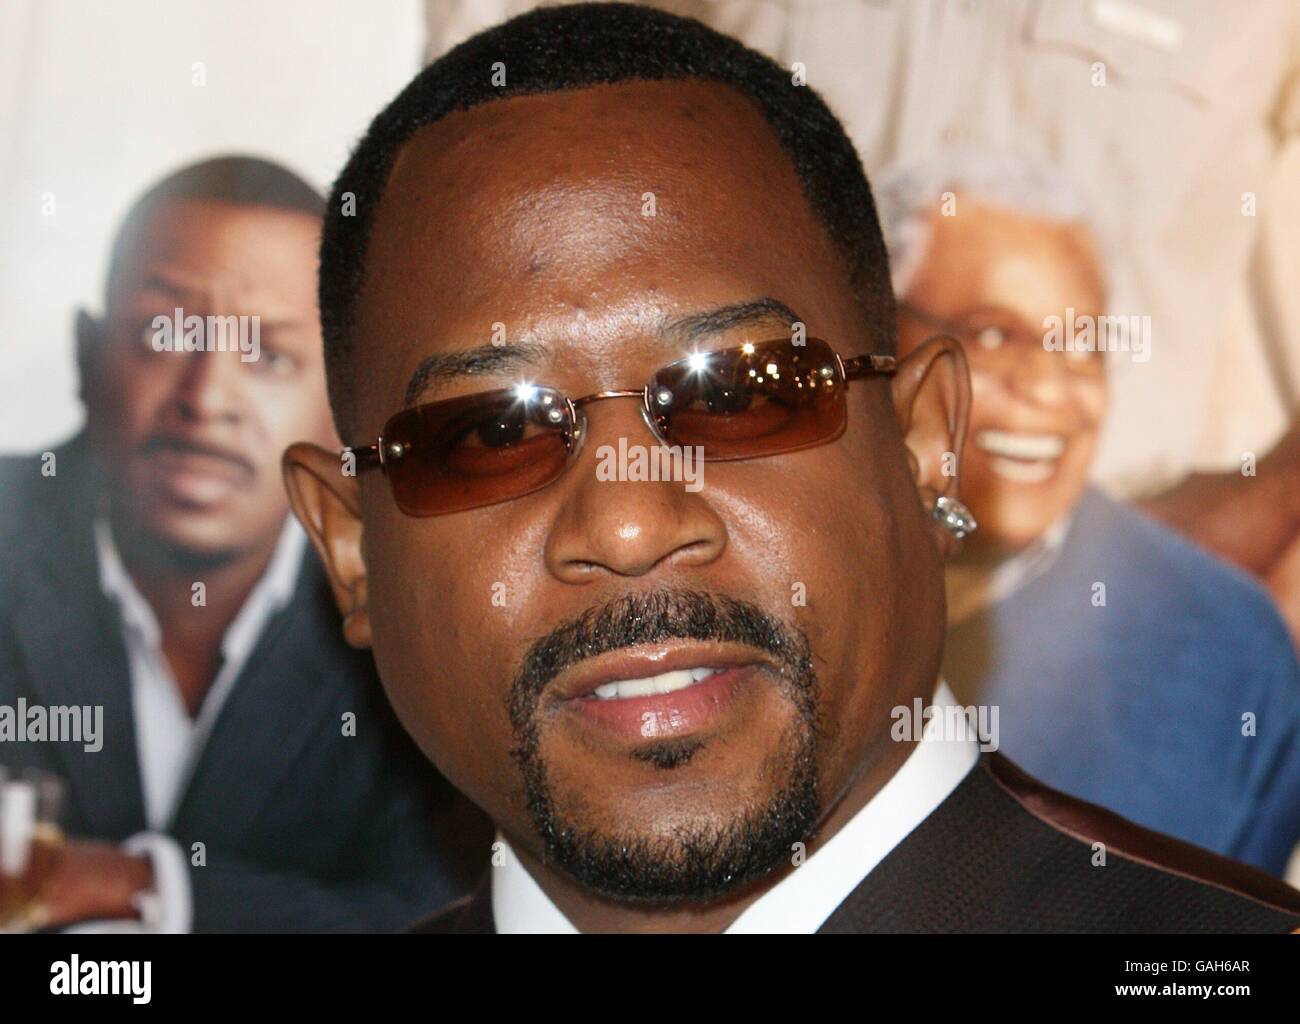 Martin Lawrence arrives at the premiere of Welcome Home Roscoe Jenkins at the Grauman's Chinese Theatre, Los Angeles. Stock Photo